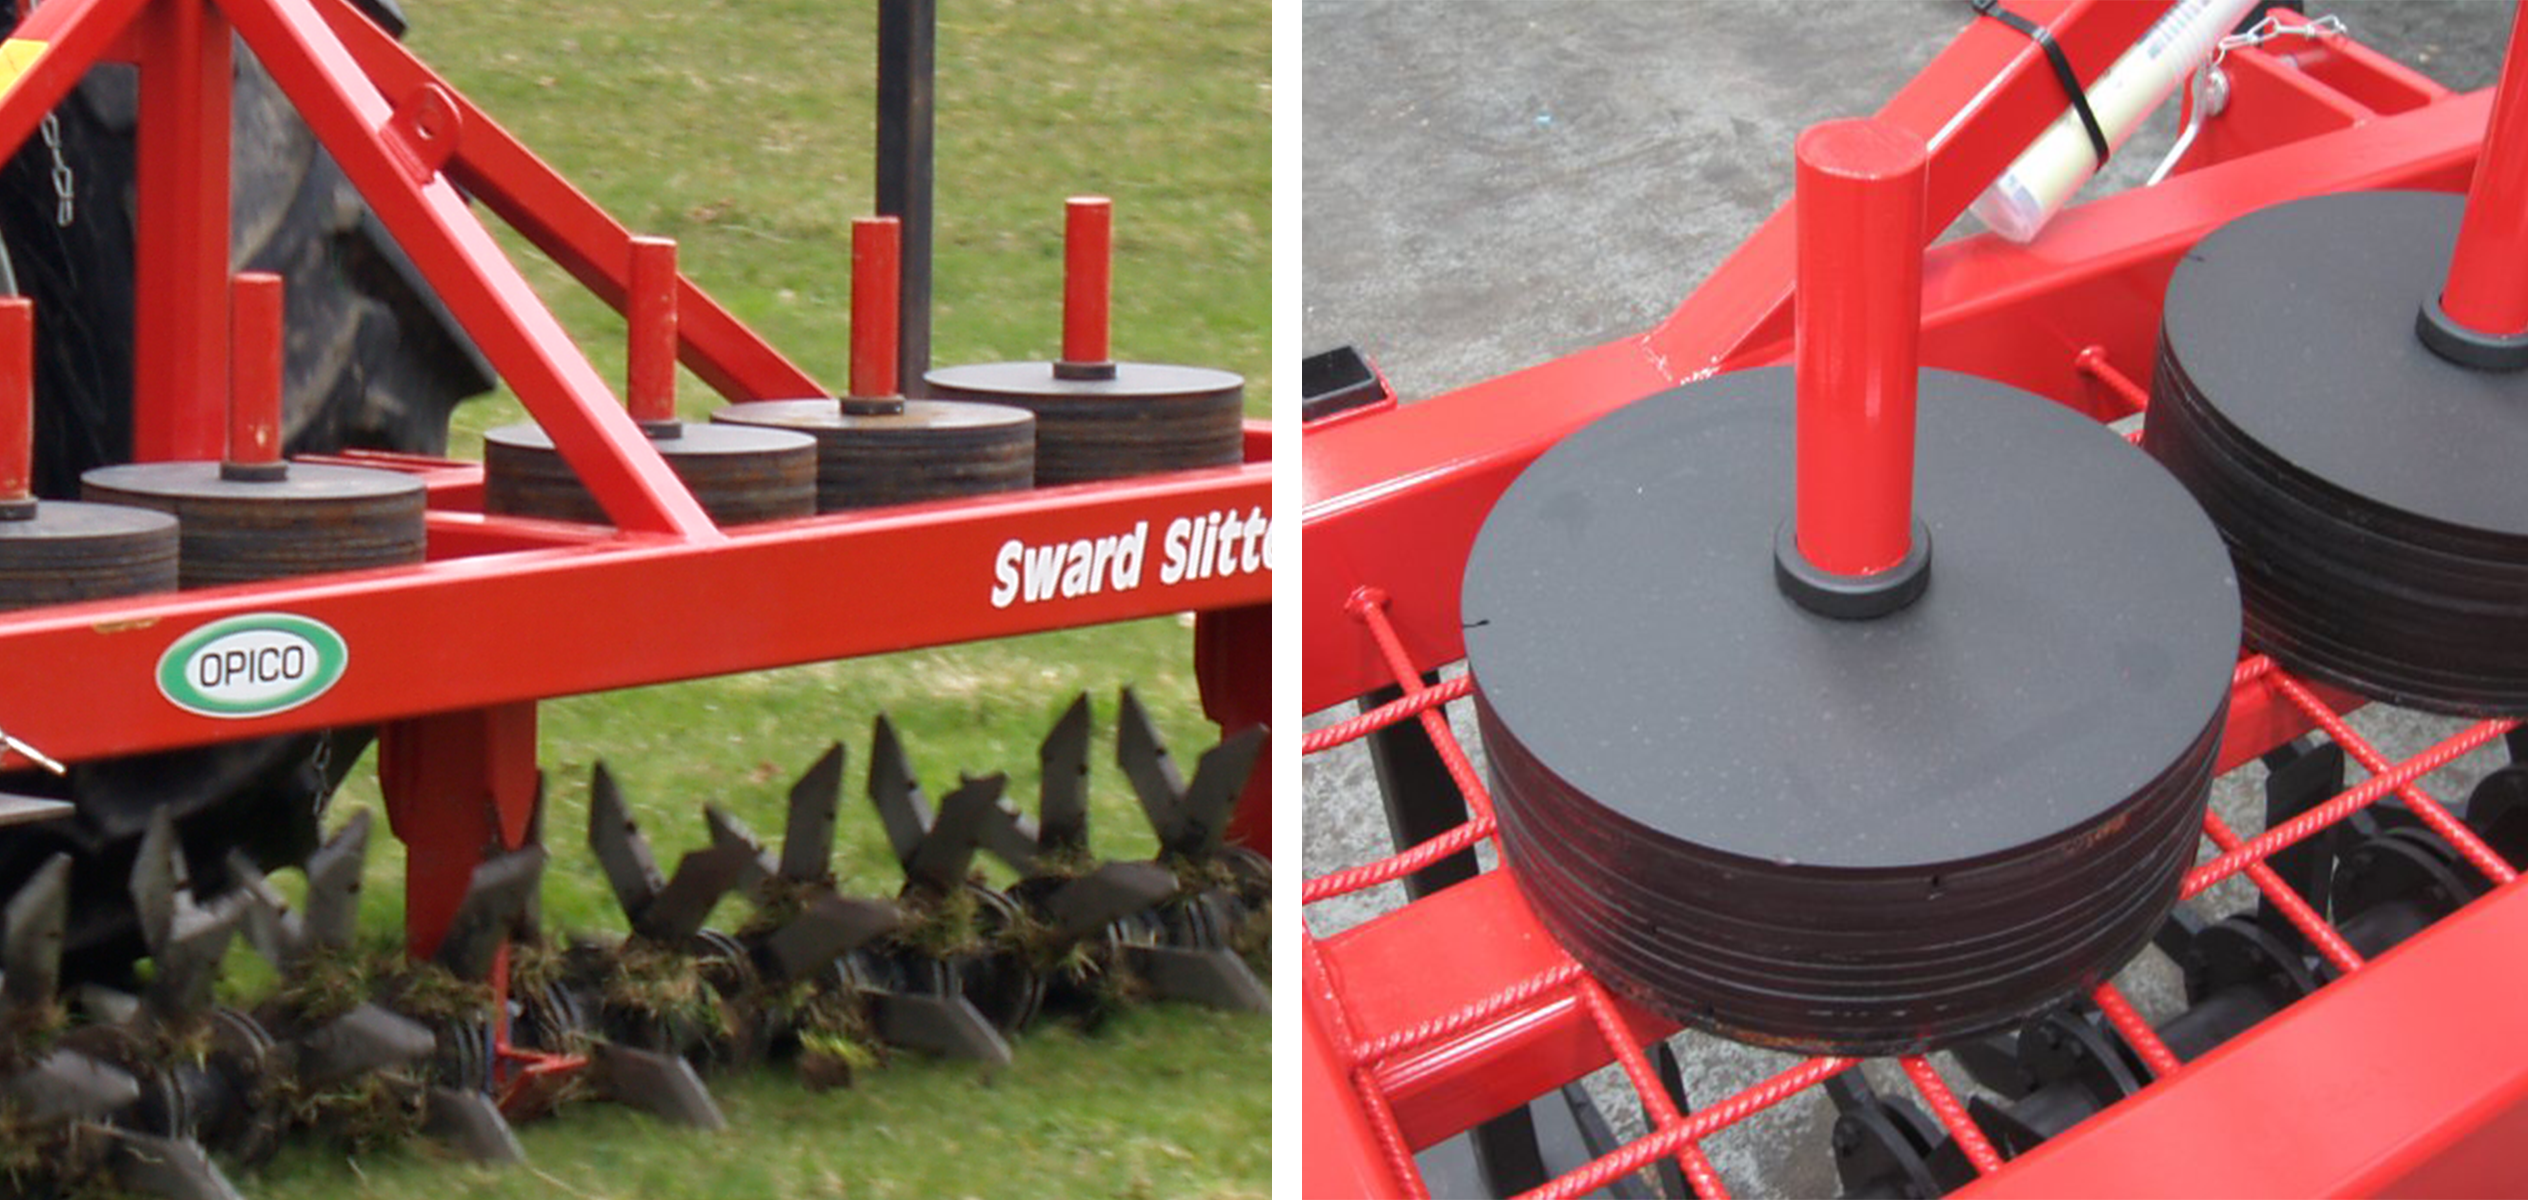 OPICO Sward Slitter Weight Carrying Rack